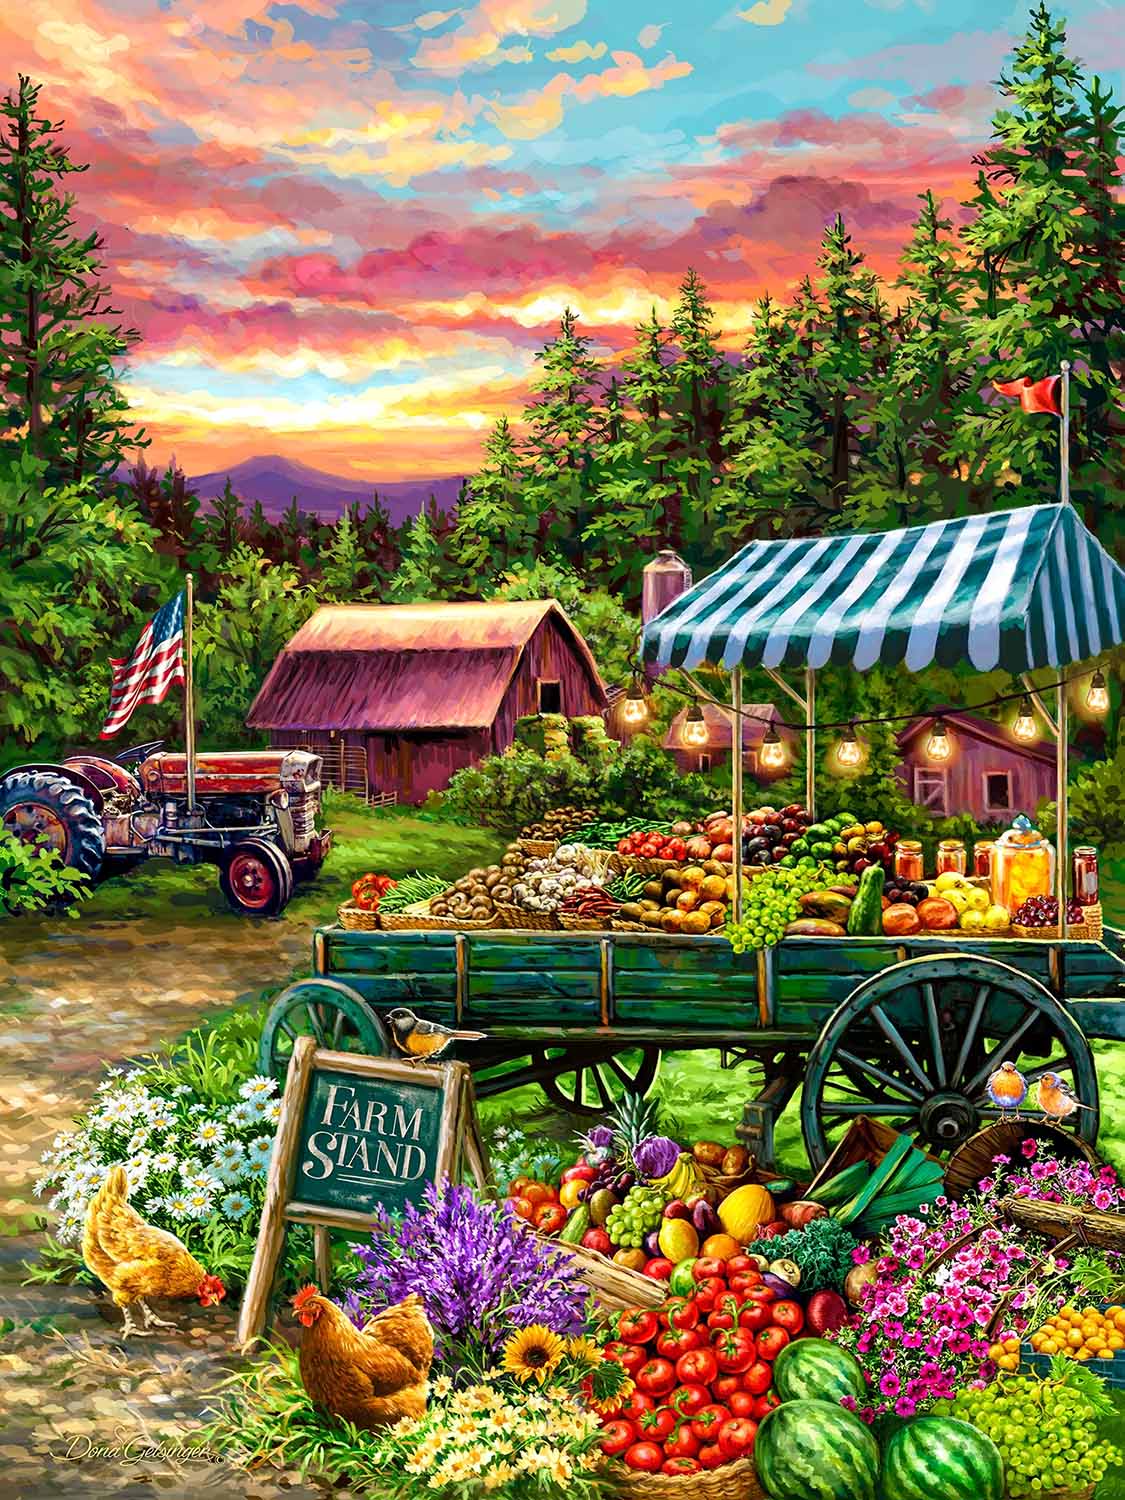 The Fruit Stand Farm Jigsaw Puzzle